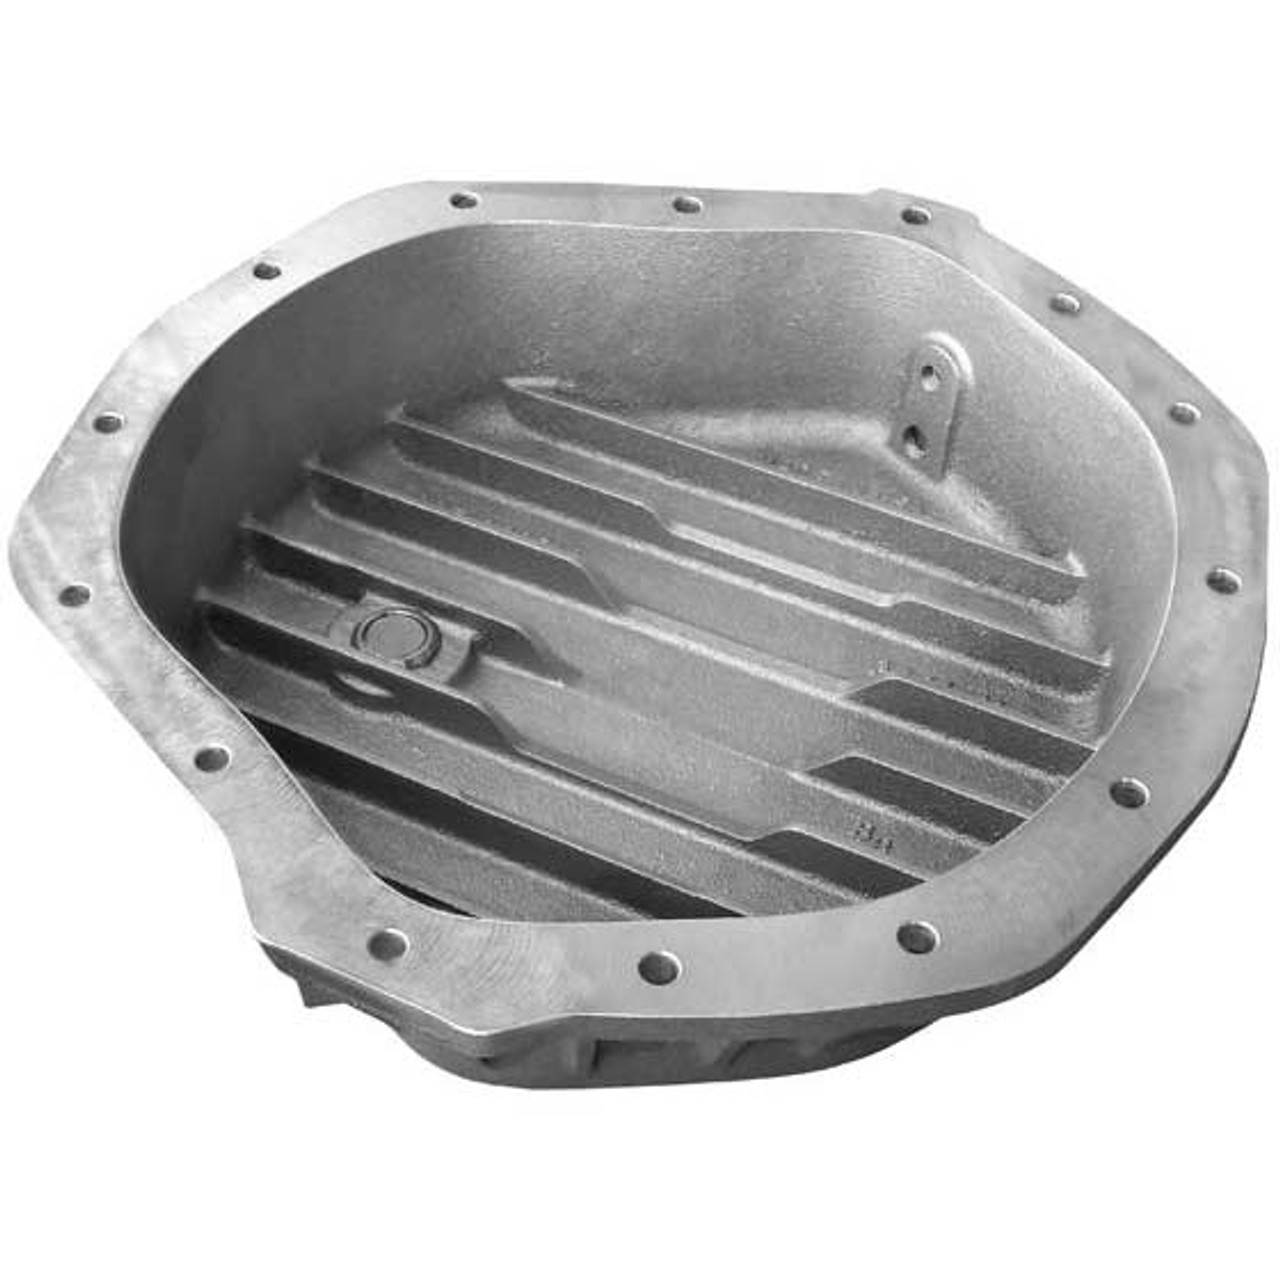 PPE HEAVY DUTY DIFFERENTIAL COVER - BRUSHED 2001-2019 GM DURAMAX | 2003-2018 DODGE CUMMINS* (WITH AA14-11.5 AXLES) (PPE138051010) Back View